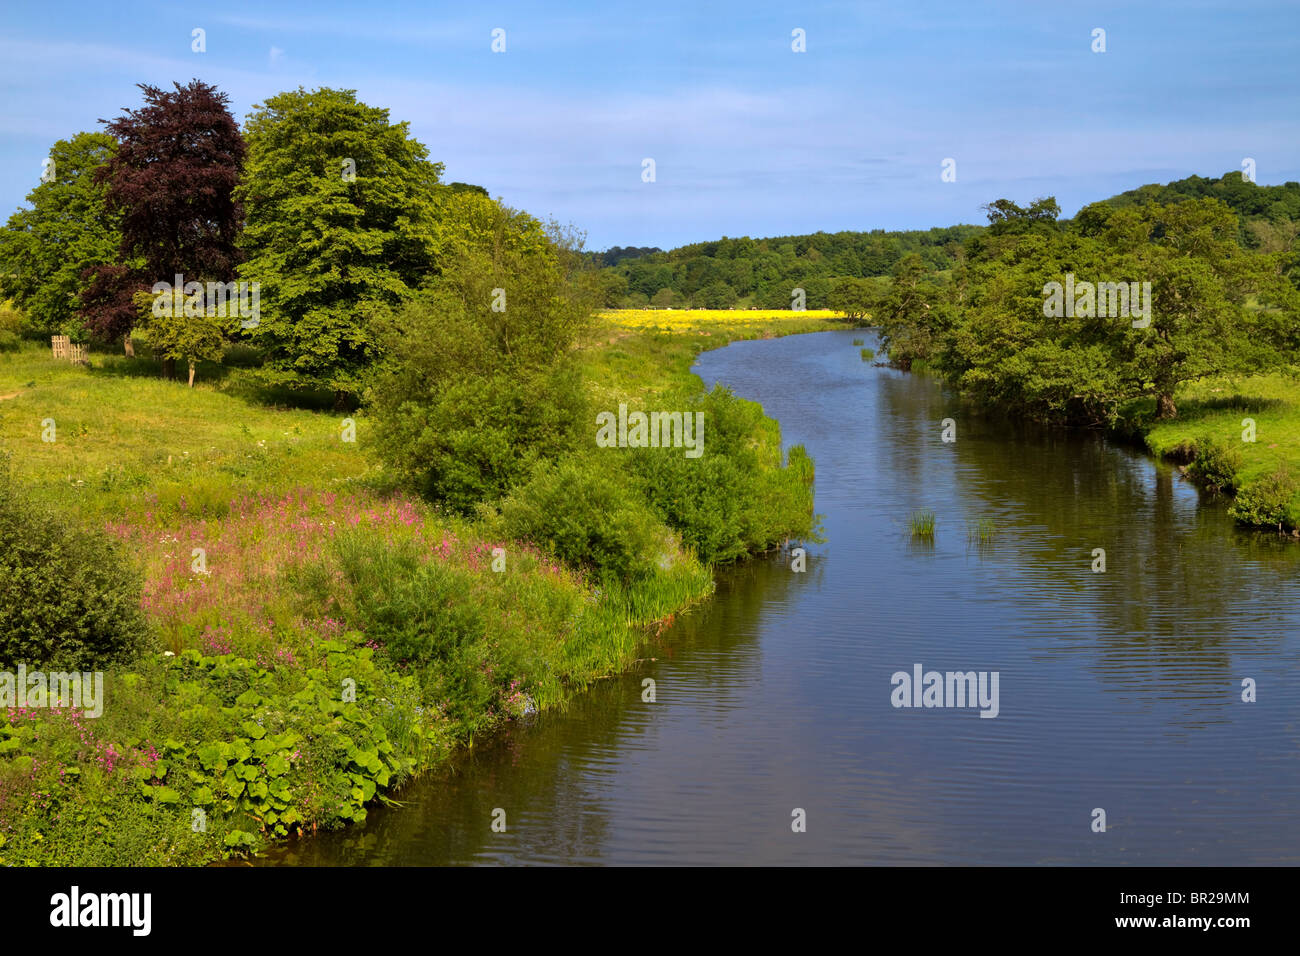 River Aln, meanders through peaceful countryside near Alnwick, Northumberland Stock Photo